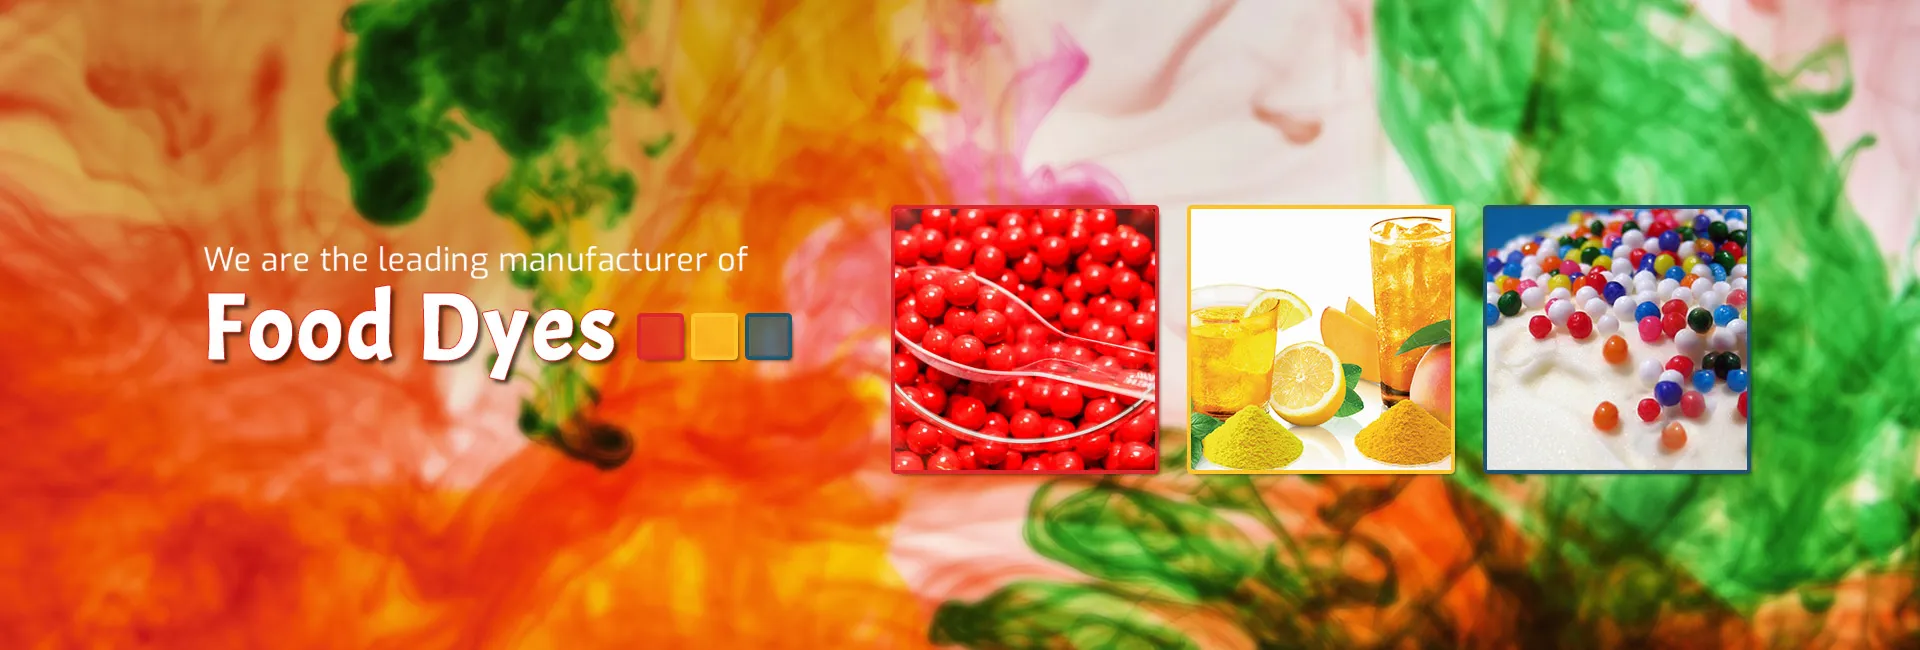 Food Dyes Manufacturer & Suppliers in South Africa